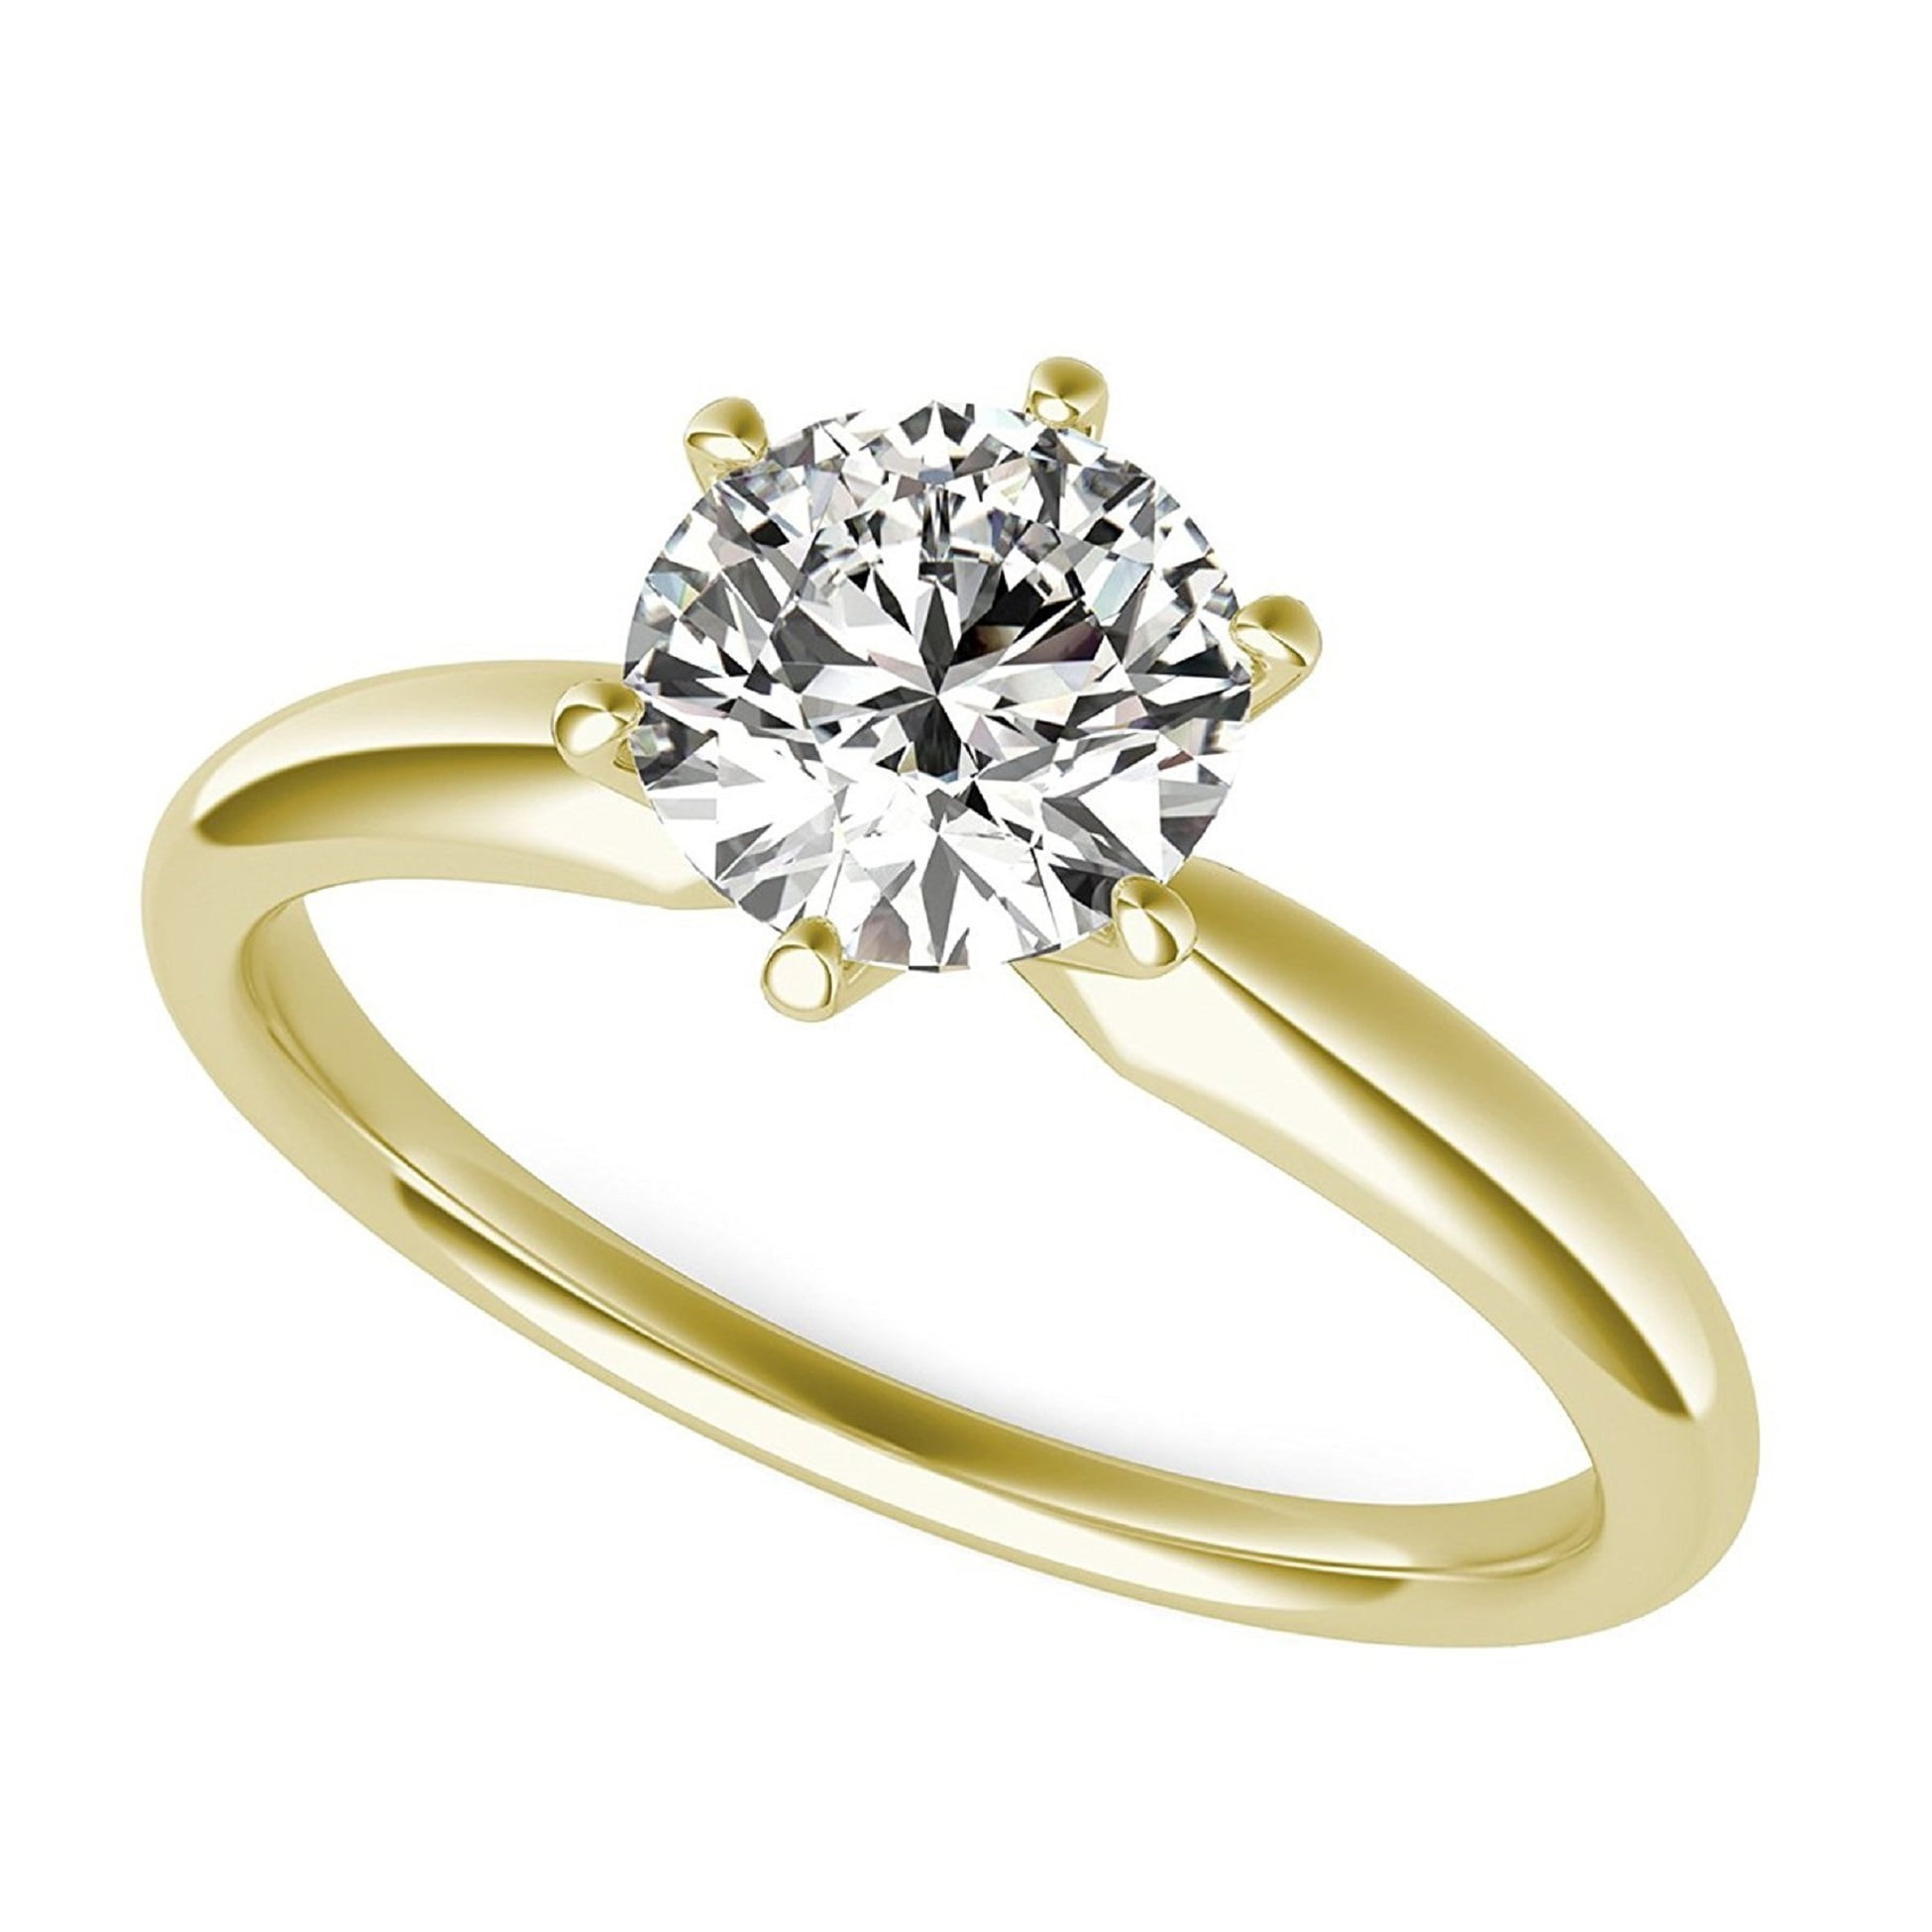 0.75 carat Round CZ Solitaire Engagement Wedding Ring Set Details about   14k Yellow Gold 6-9 